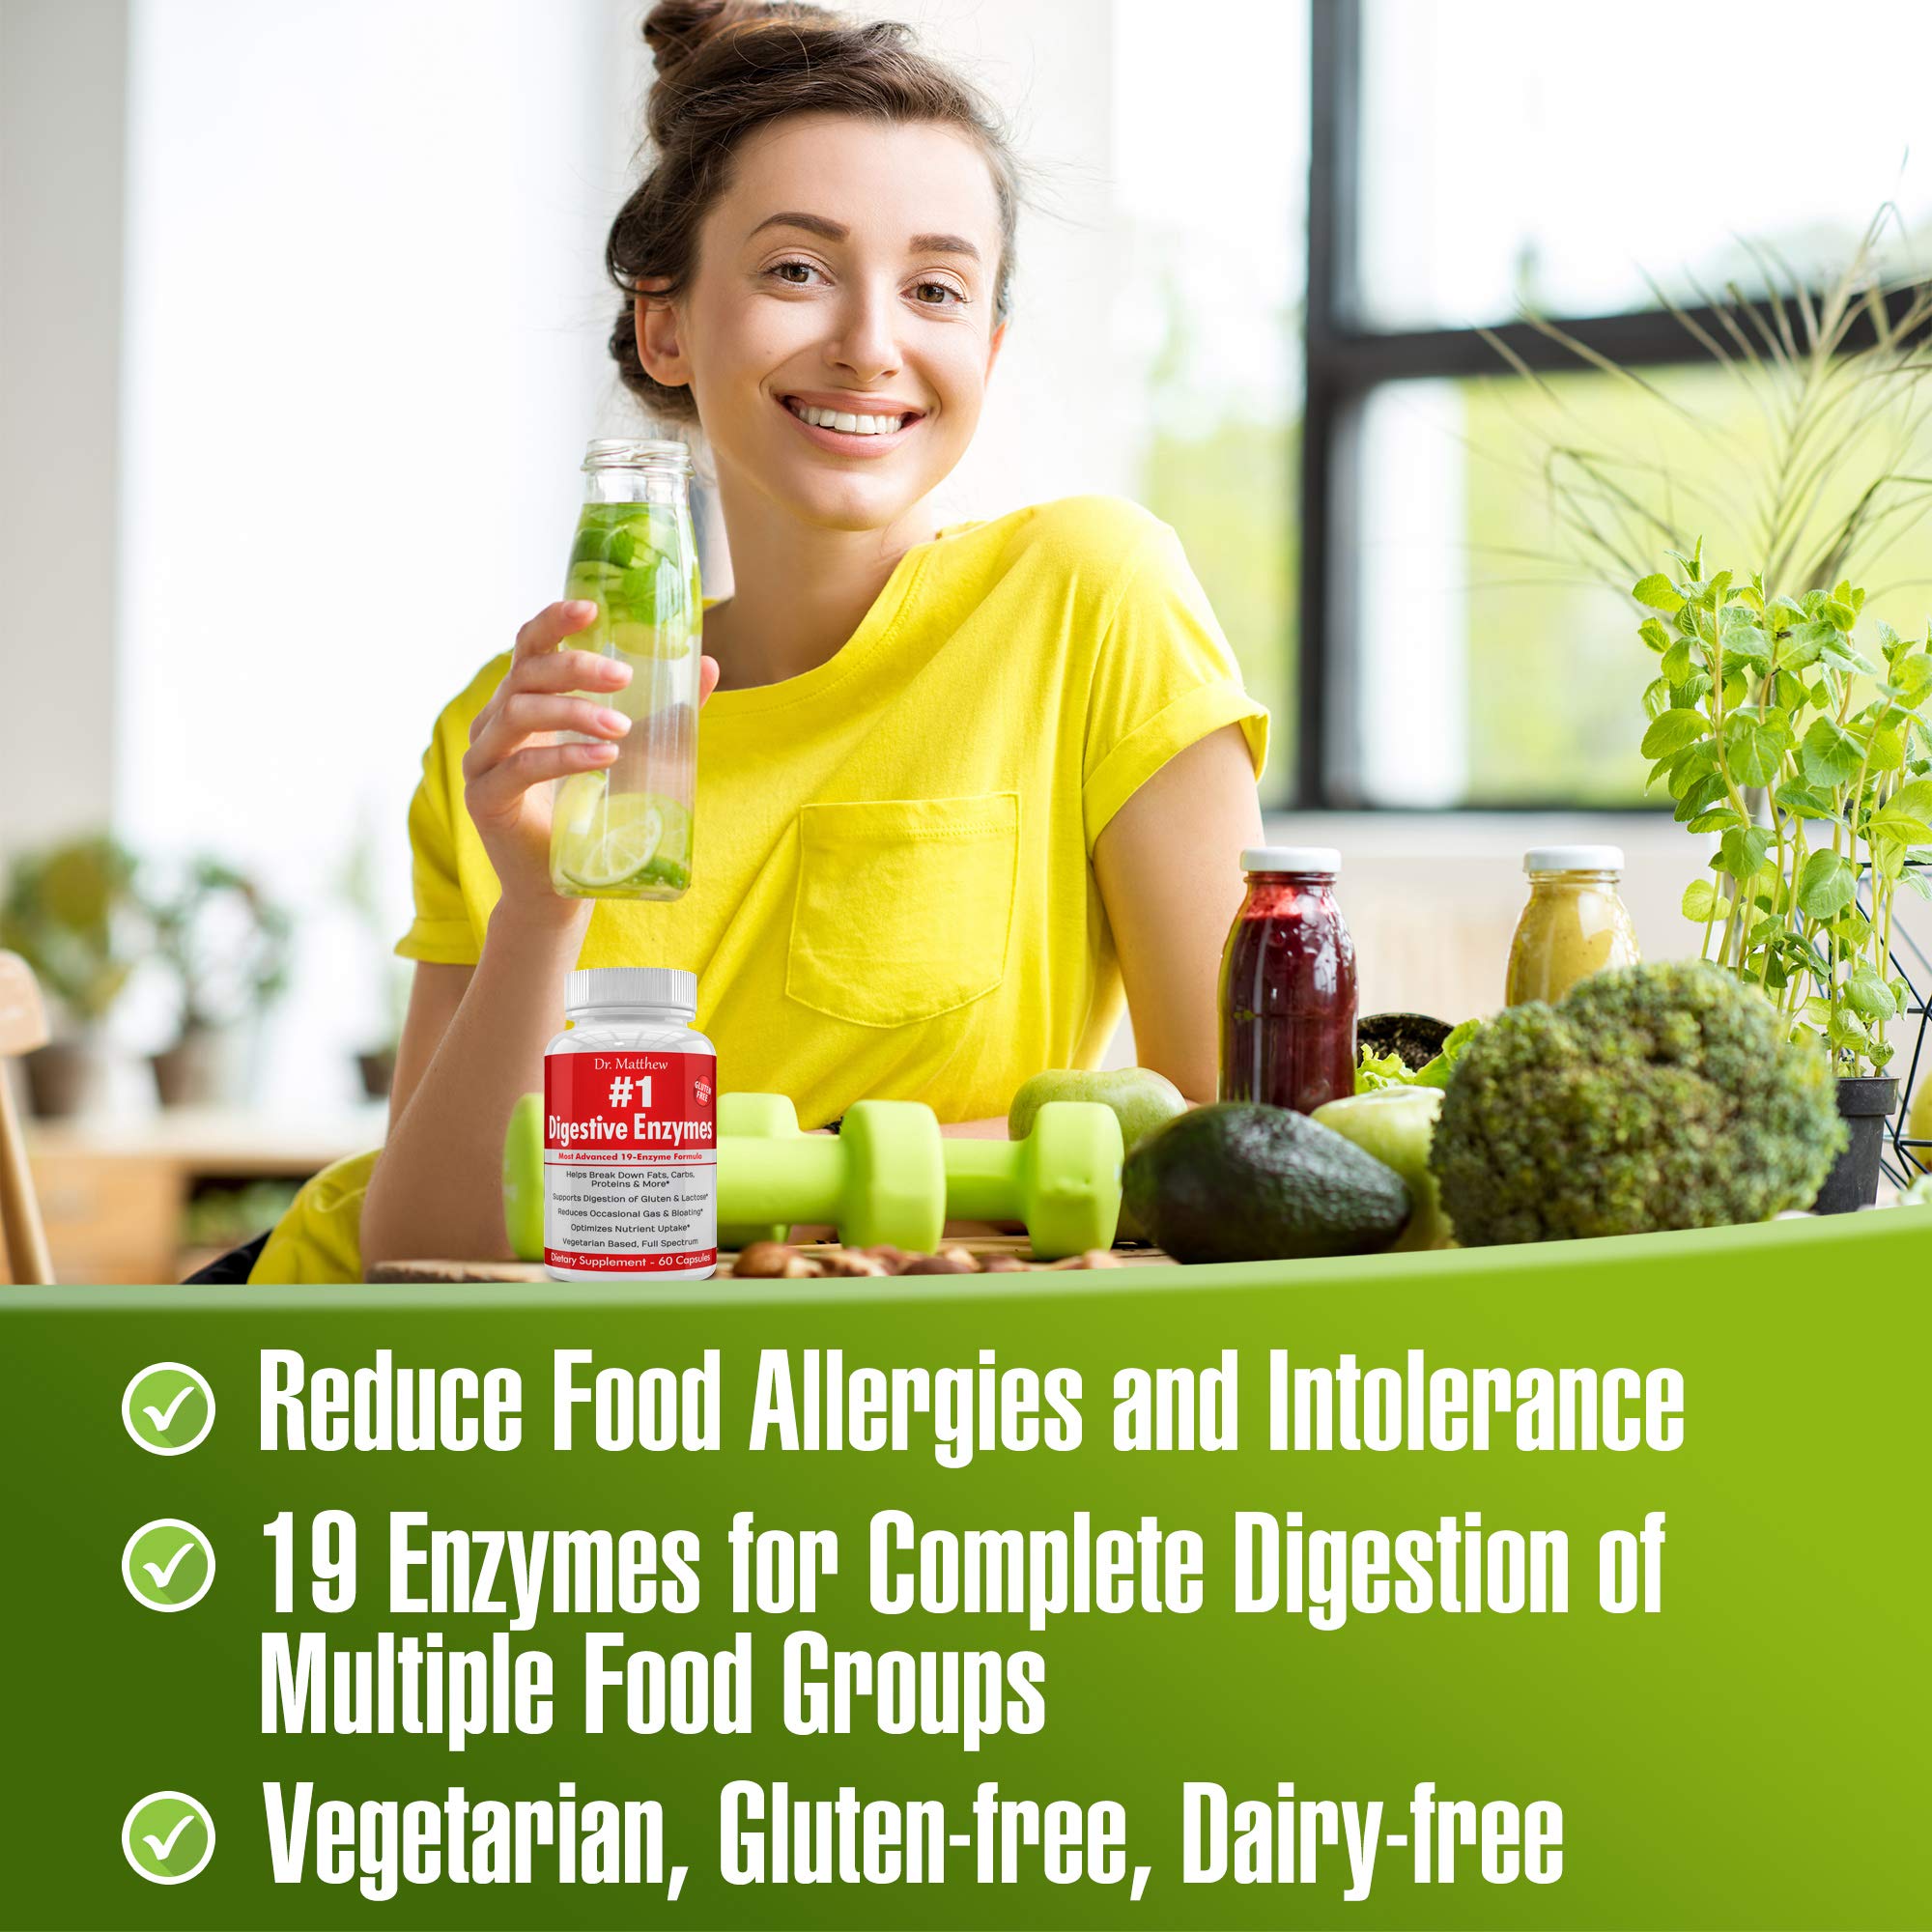 Enzymes for Digestion with Lactase Lipase Amylase Bromelain and 15 more! One of the Best Digestive Enzyme Supplements for IBS, Gallbladder, Gas, Bloating, Constipation Relief. Vegetarian, Gluten-Free